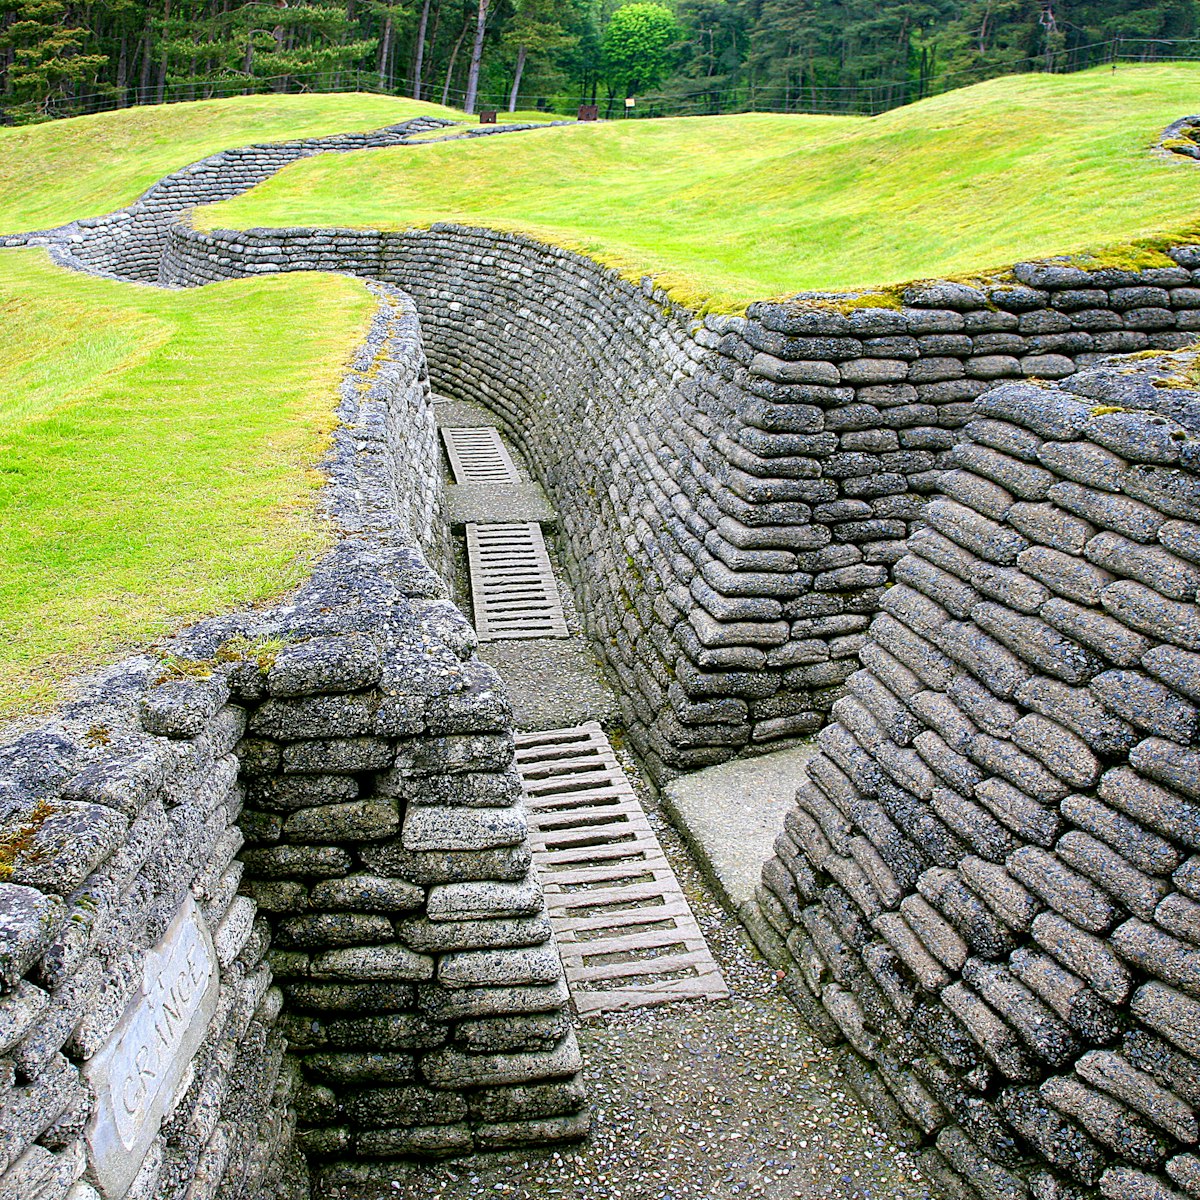 Military trenches made from concrete at the Canadian National Vimy Memorial in France.